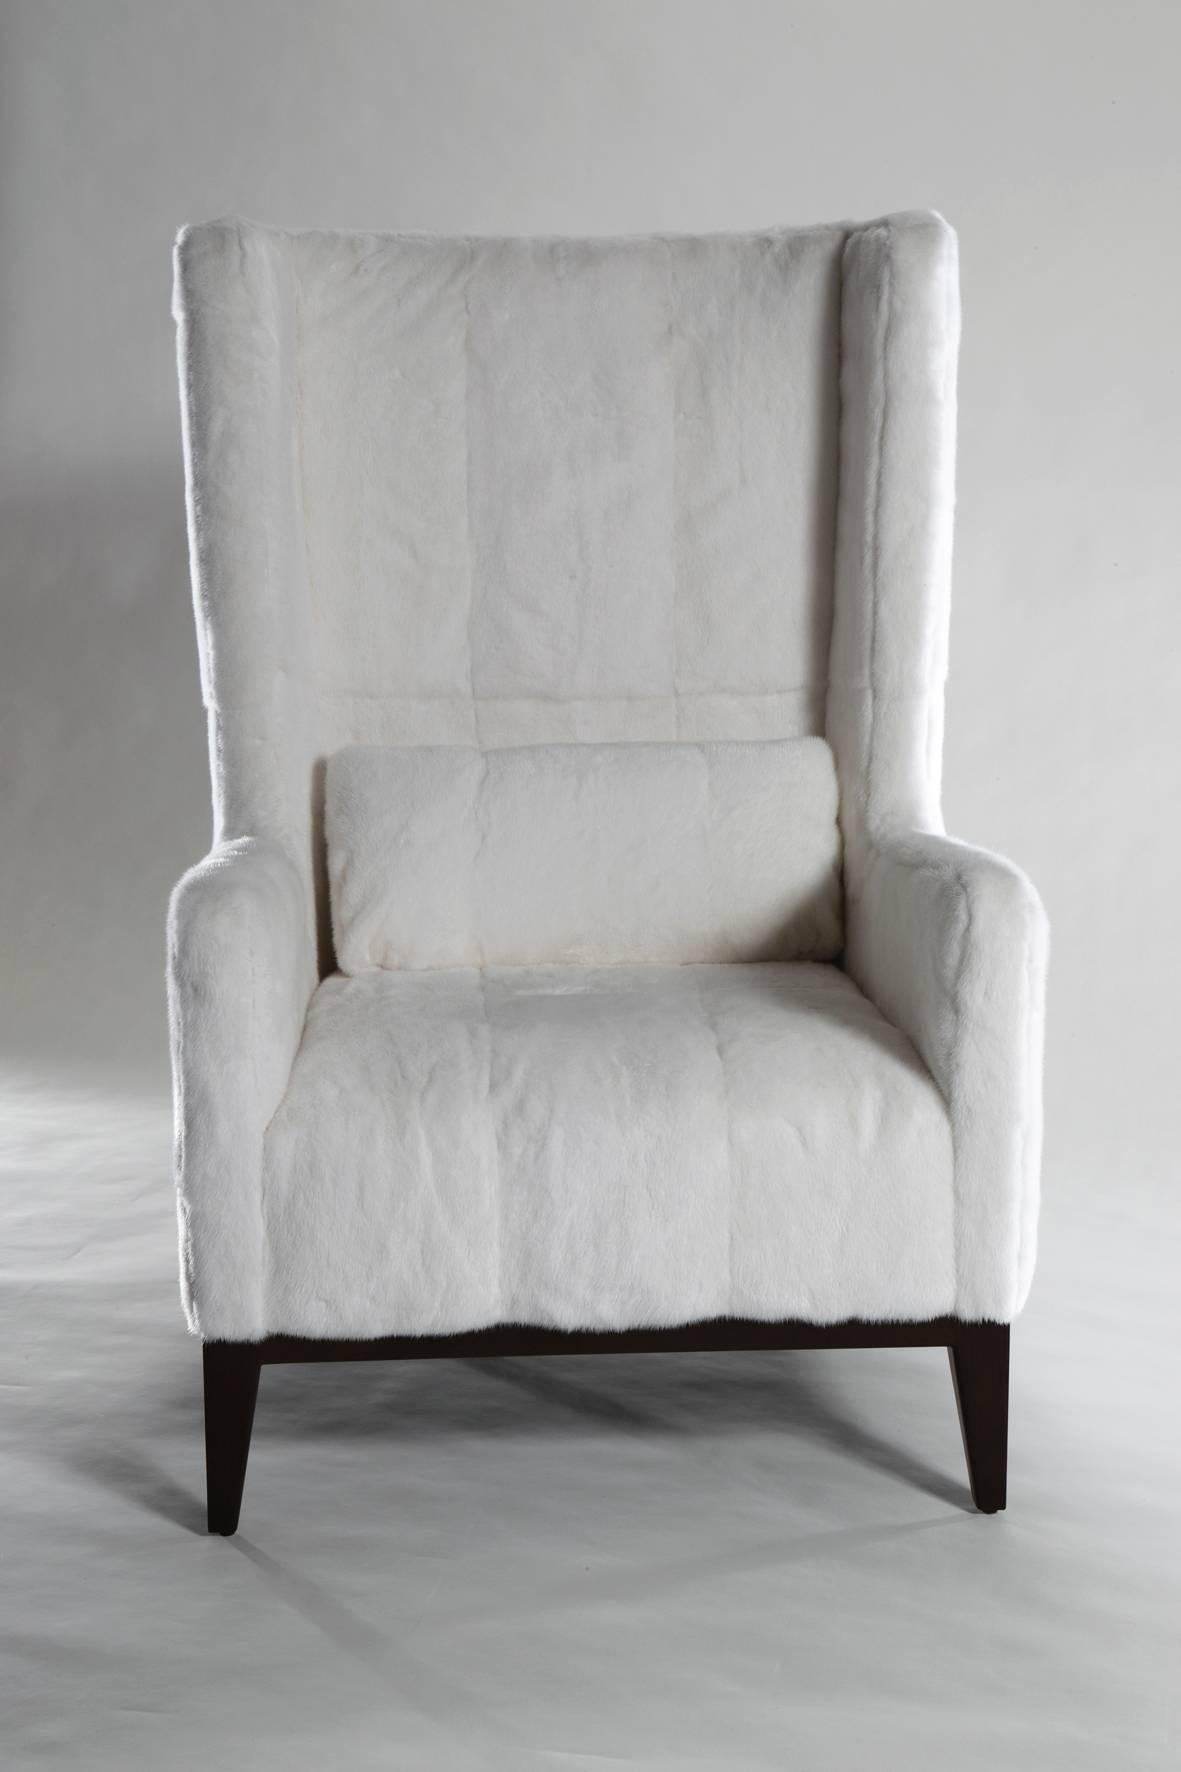 Cozy and luxurious armchair upholstered in white mink.
Also available in golden mink, sable, coyote or rex rabbit.
Our "Saint-Moritz" armchair is handcrafted in France with the finest materials and master workmanship.